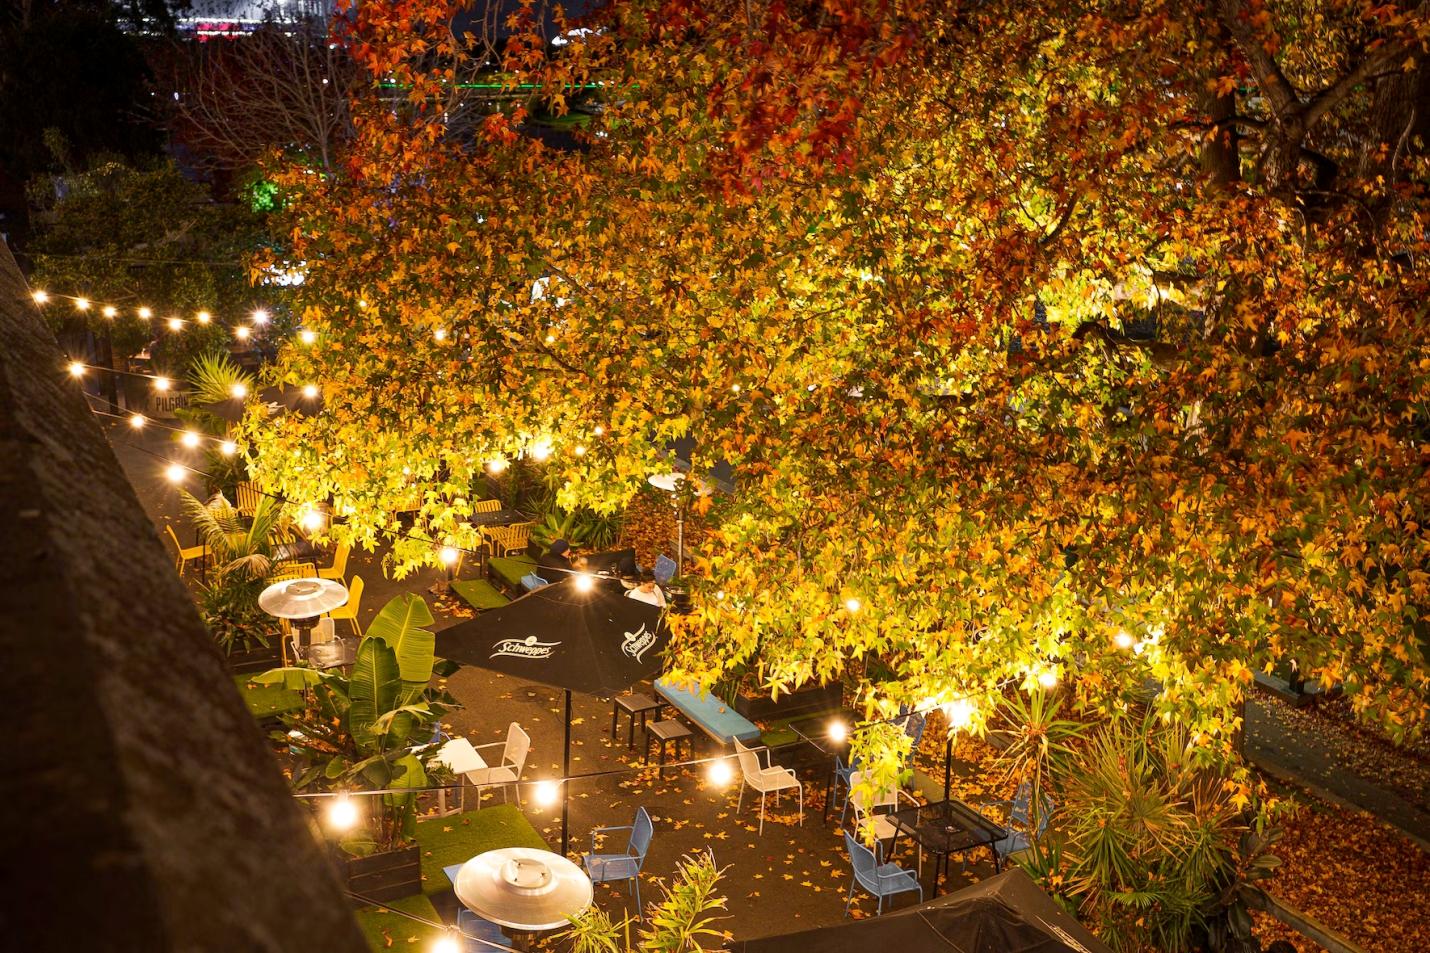 An image of a garden with lights